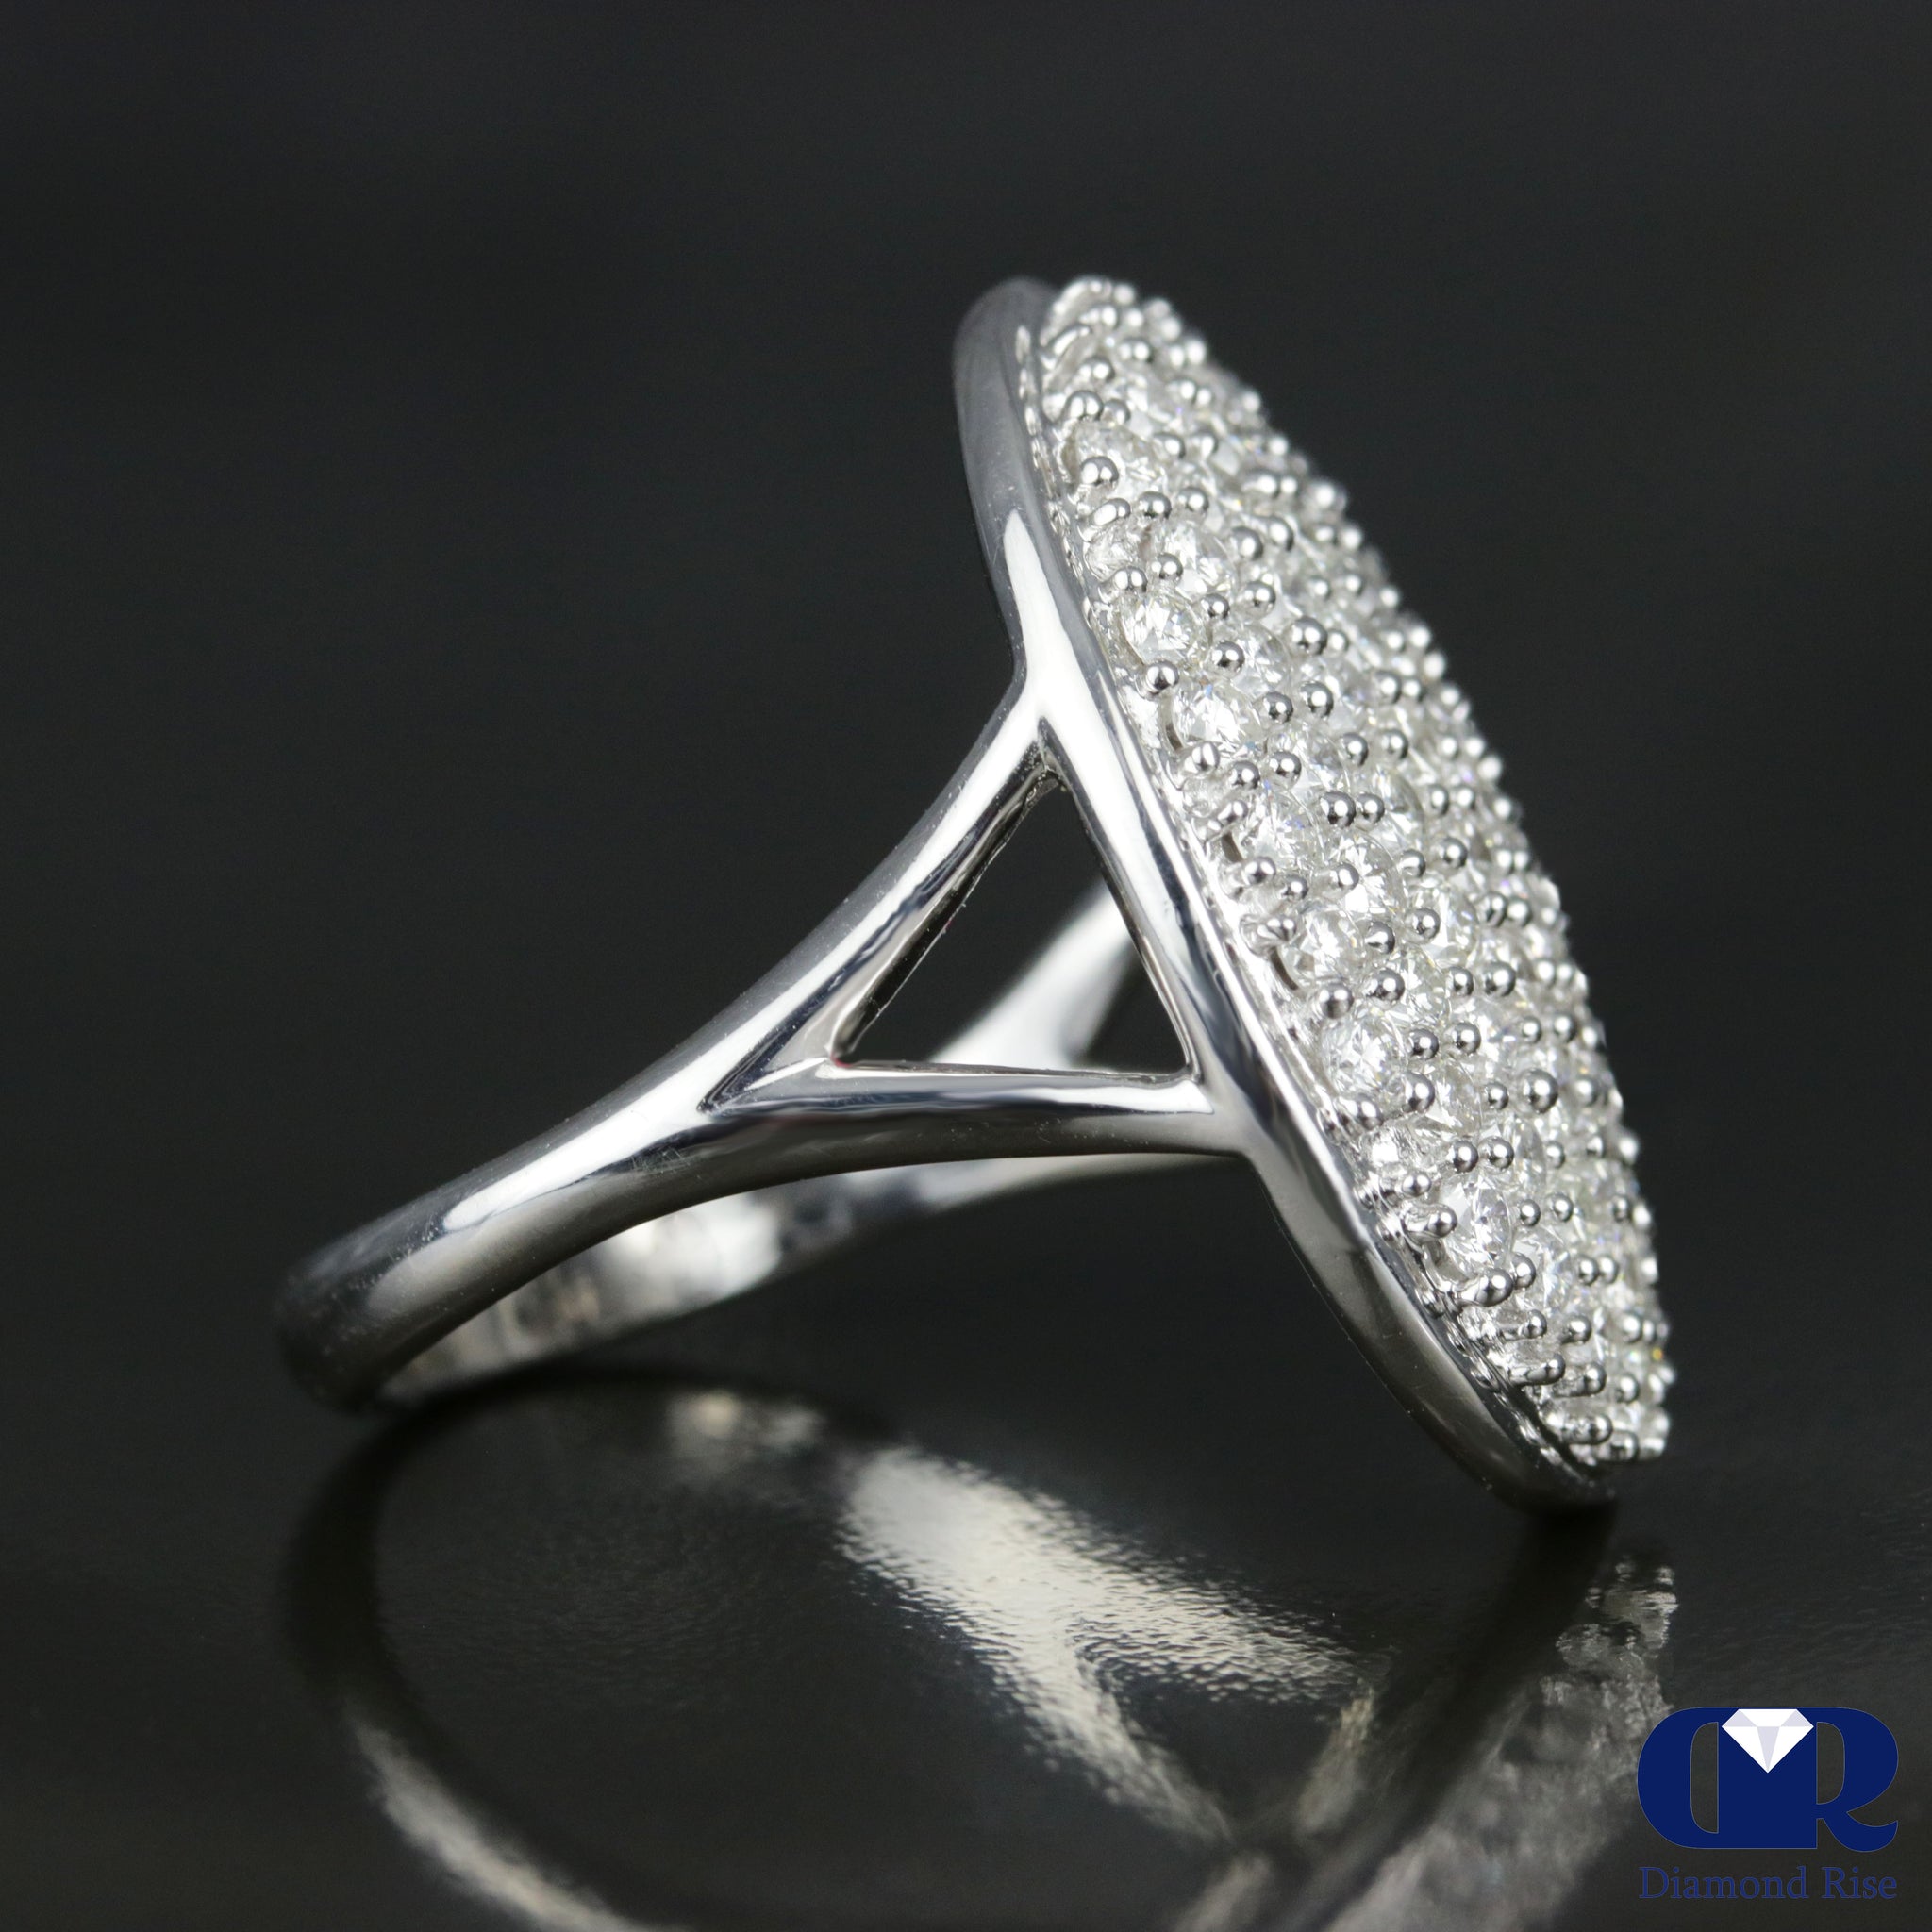 Large Oval Shaped Diamond Cocktail Ring 